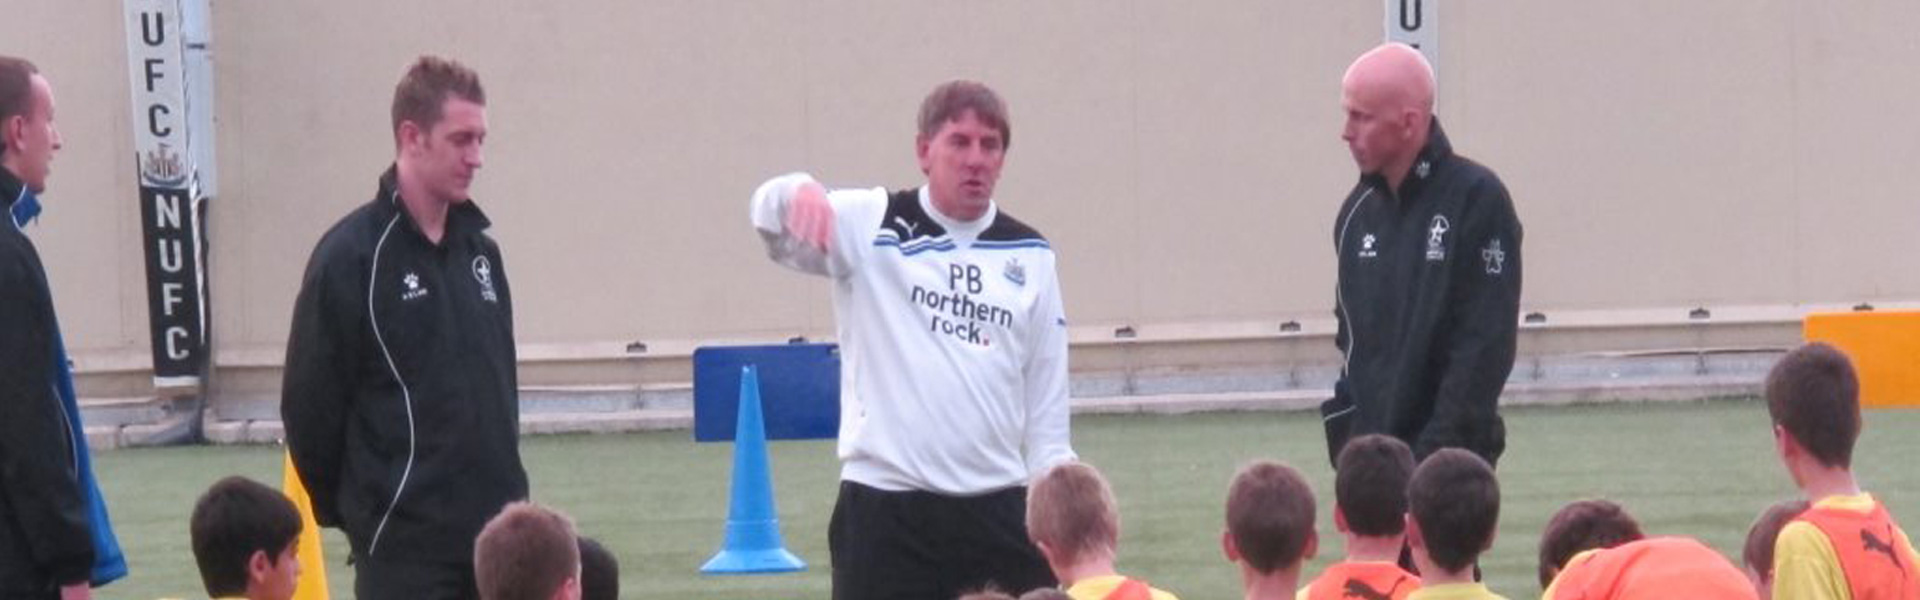 PFT training at Newcastle United with Peter Beardsley